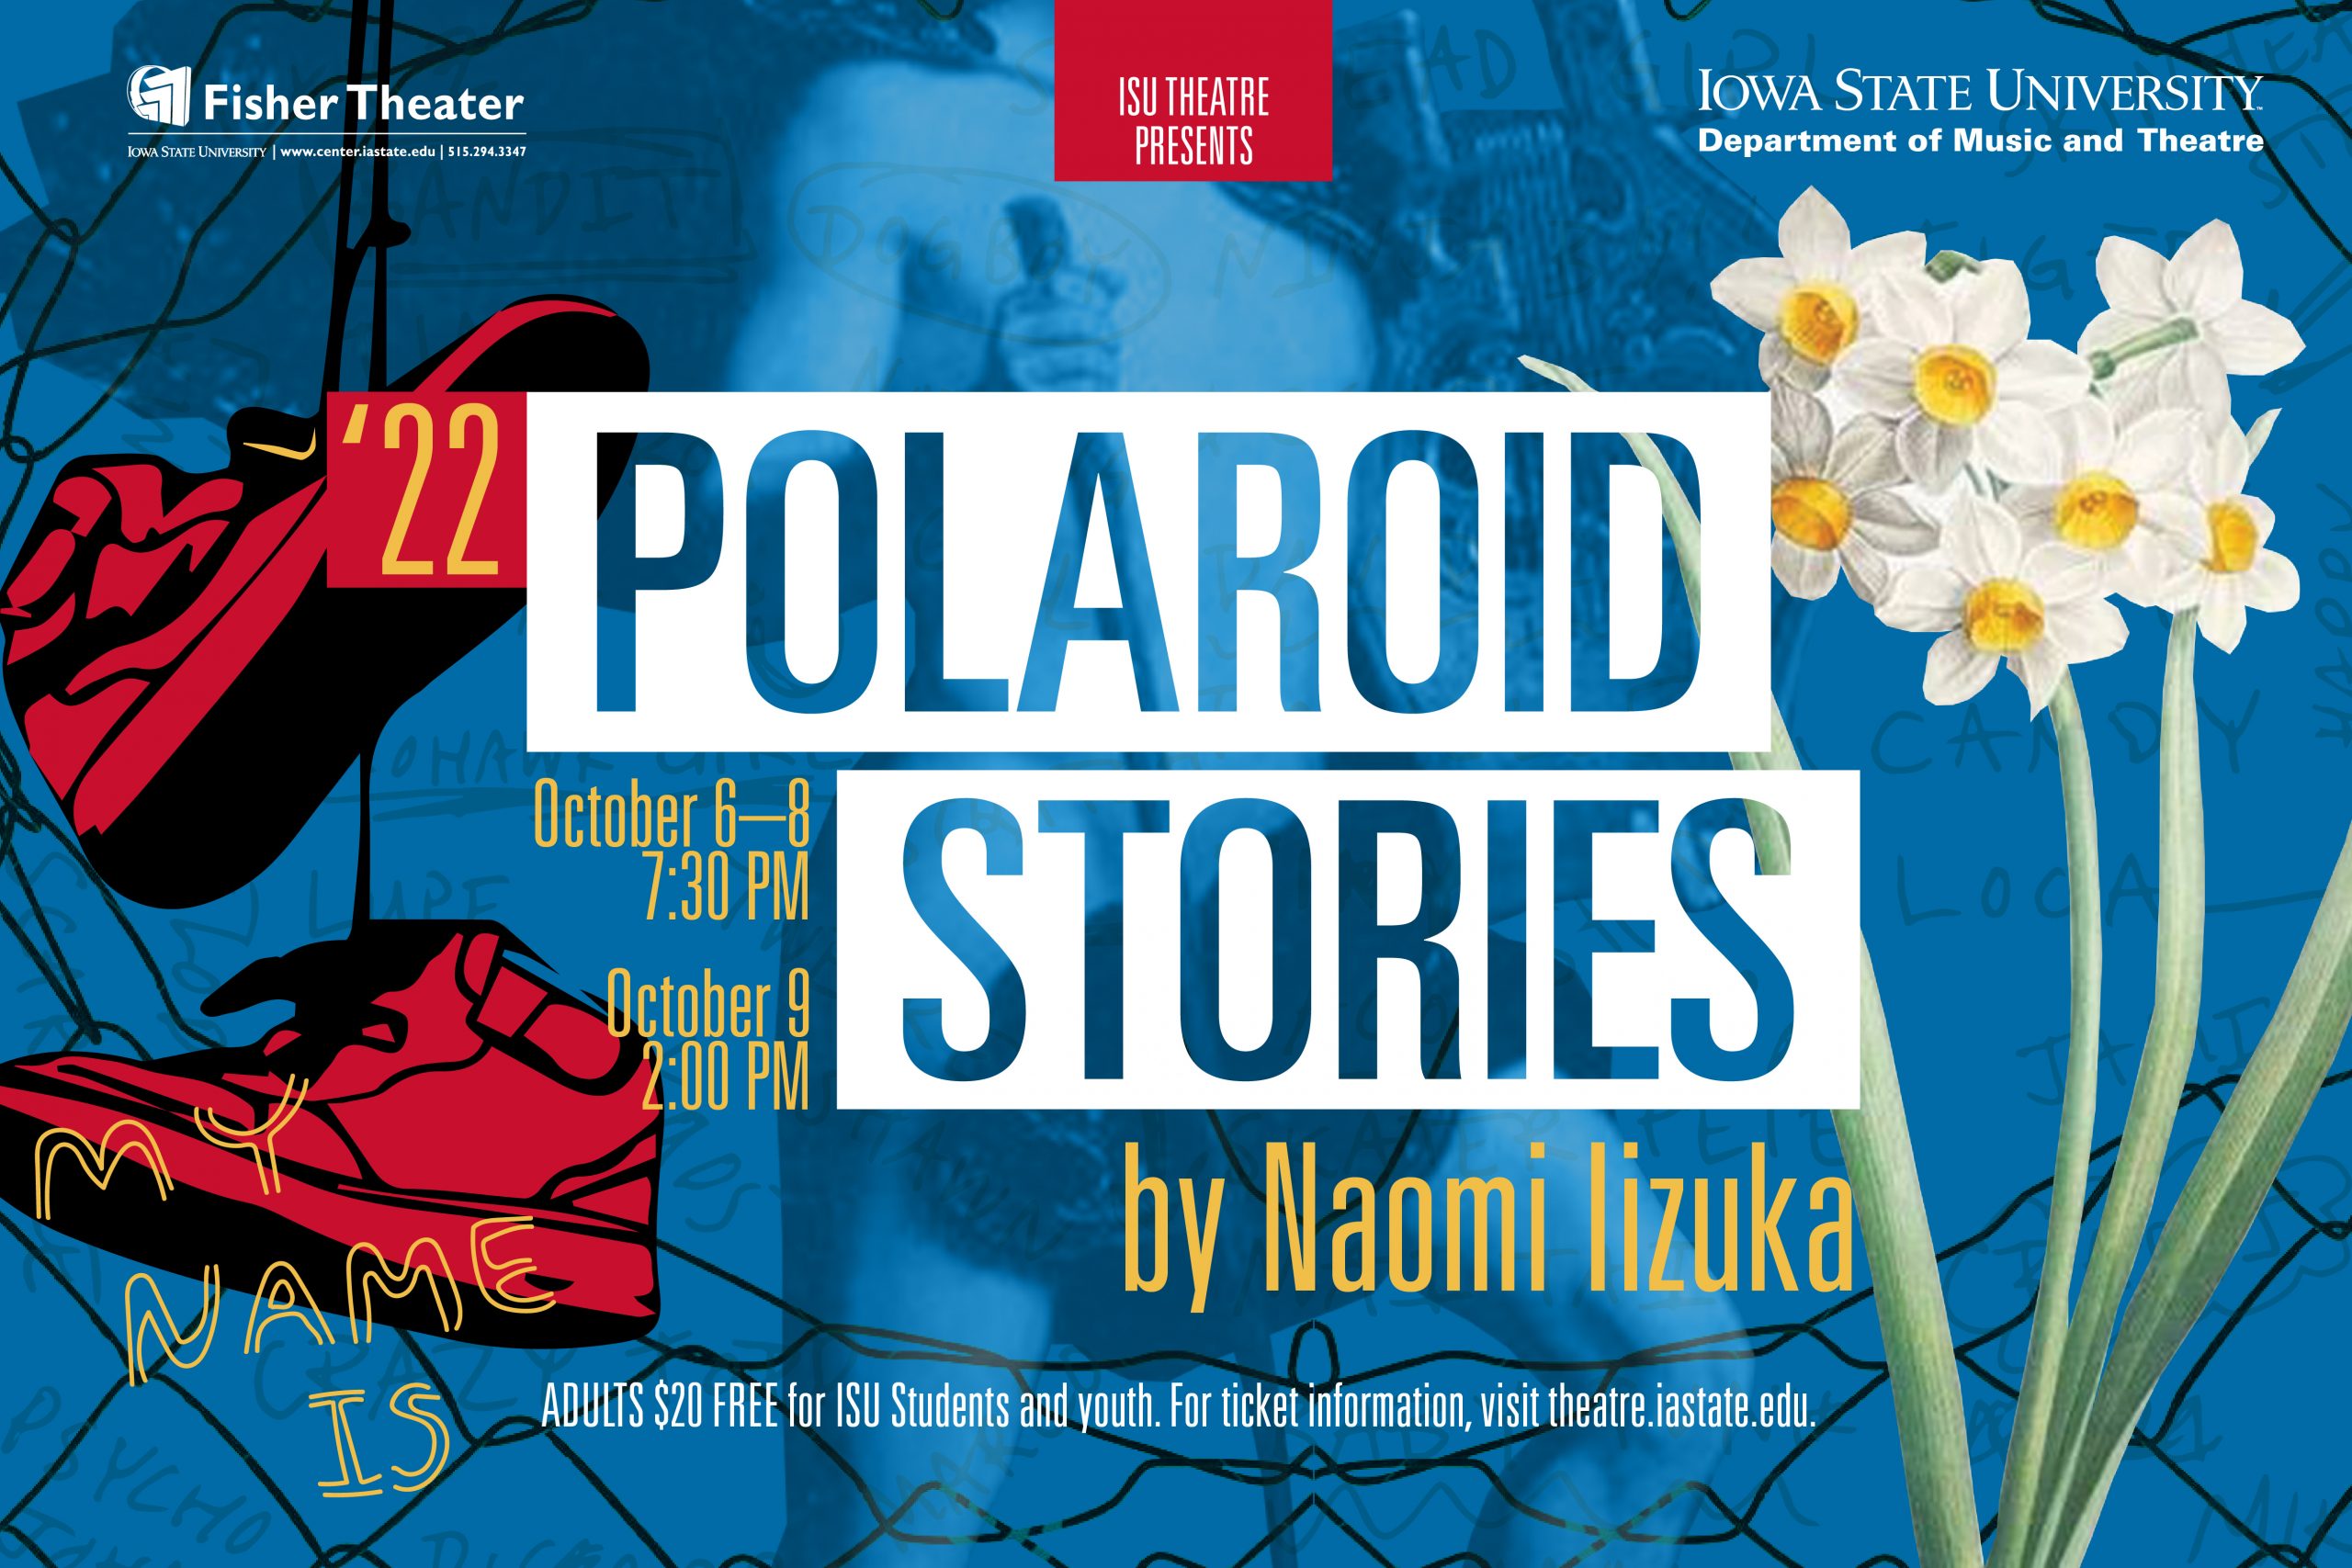 Poster collage for Polaroid Stories, with illustrated red sneakers and daffodils